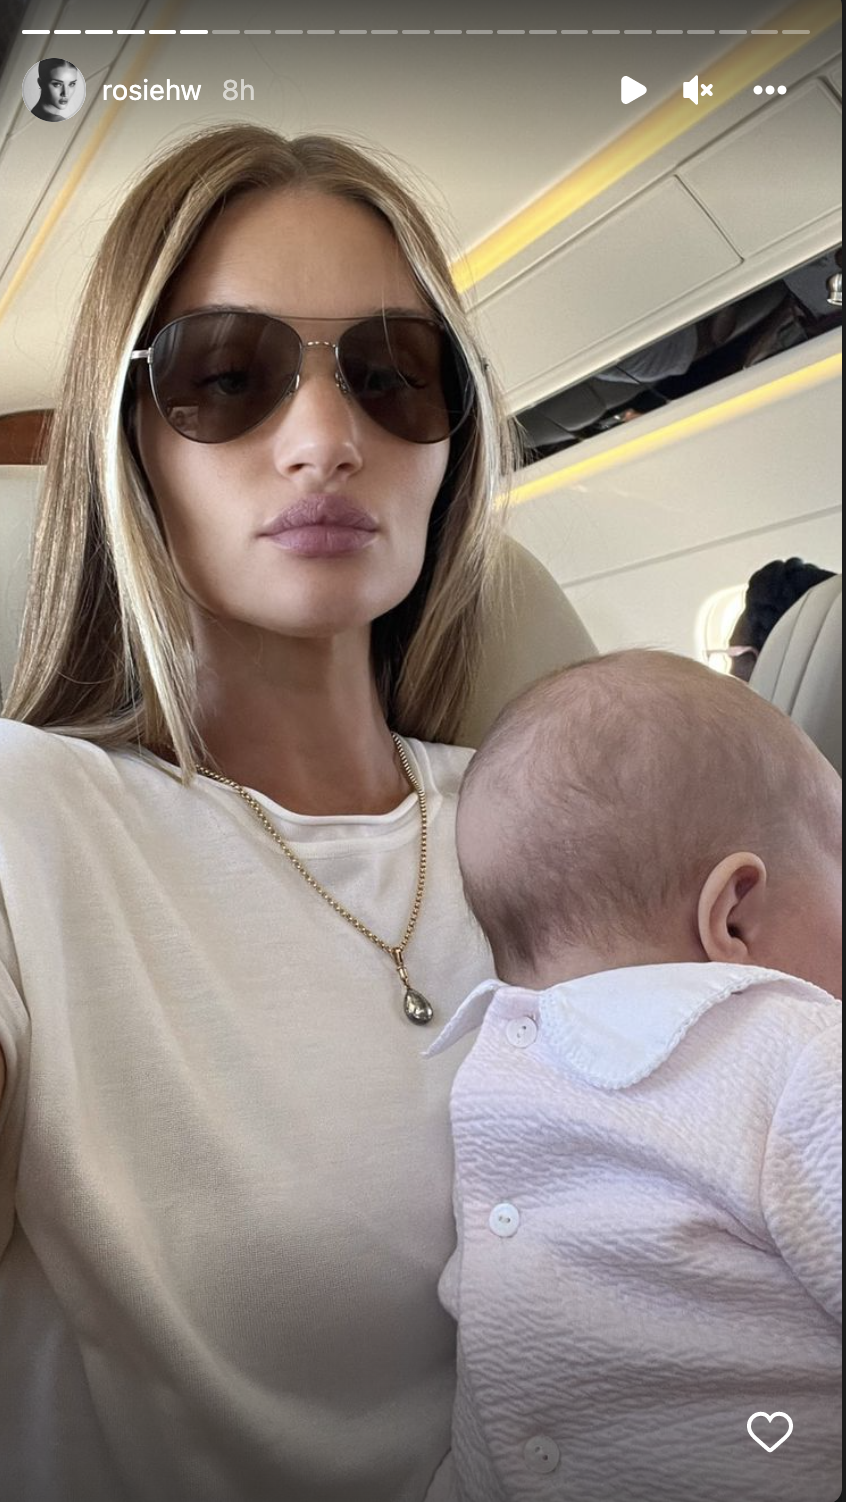 Rosie Huntington-Whiteley shared a photo of her holding daughter Isabella while on a flight.(Photo: Rosie Huntington-Whiteley/Instagram)